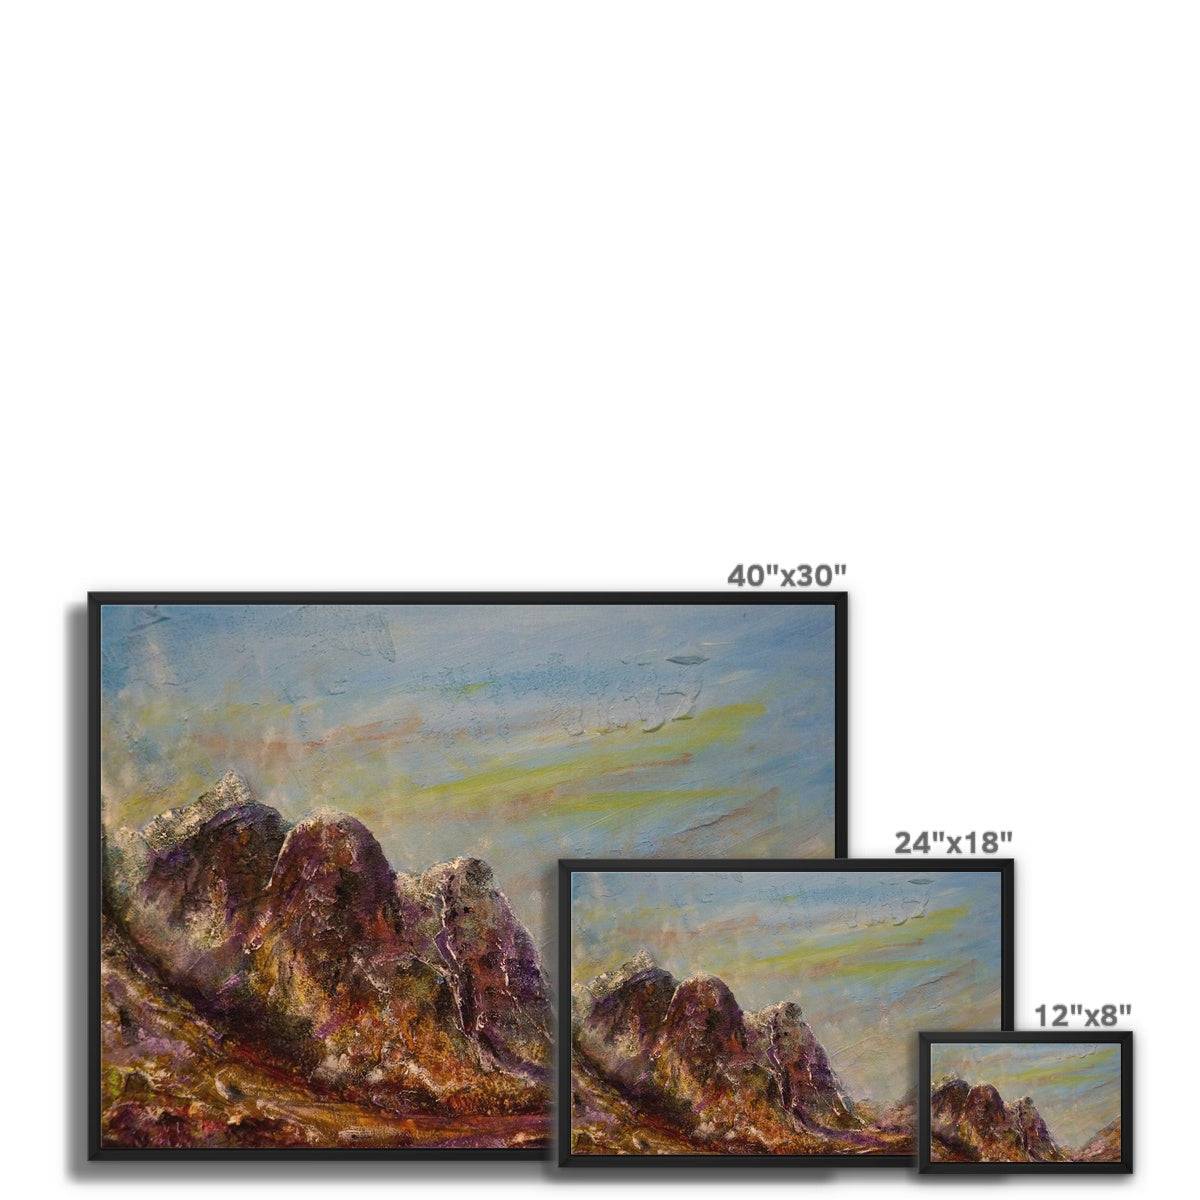 Three Sisters Glencoe Painting | Framed Canvas From Scotland-Floating Framed Canvas Prints-Glencoe Art Gallery-Paintings, Prints, Homeware, Art Gifts From Scotland By Scottish Artist Kevin Hunter